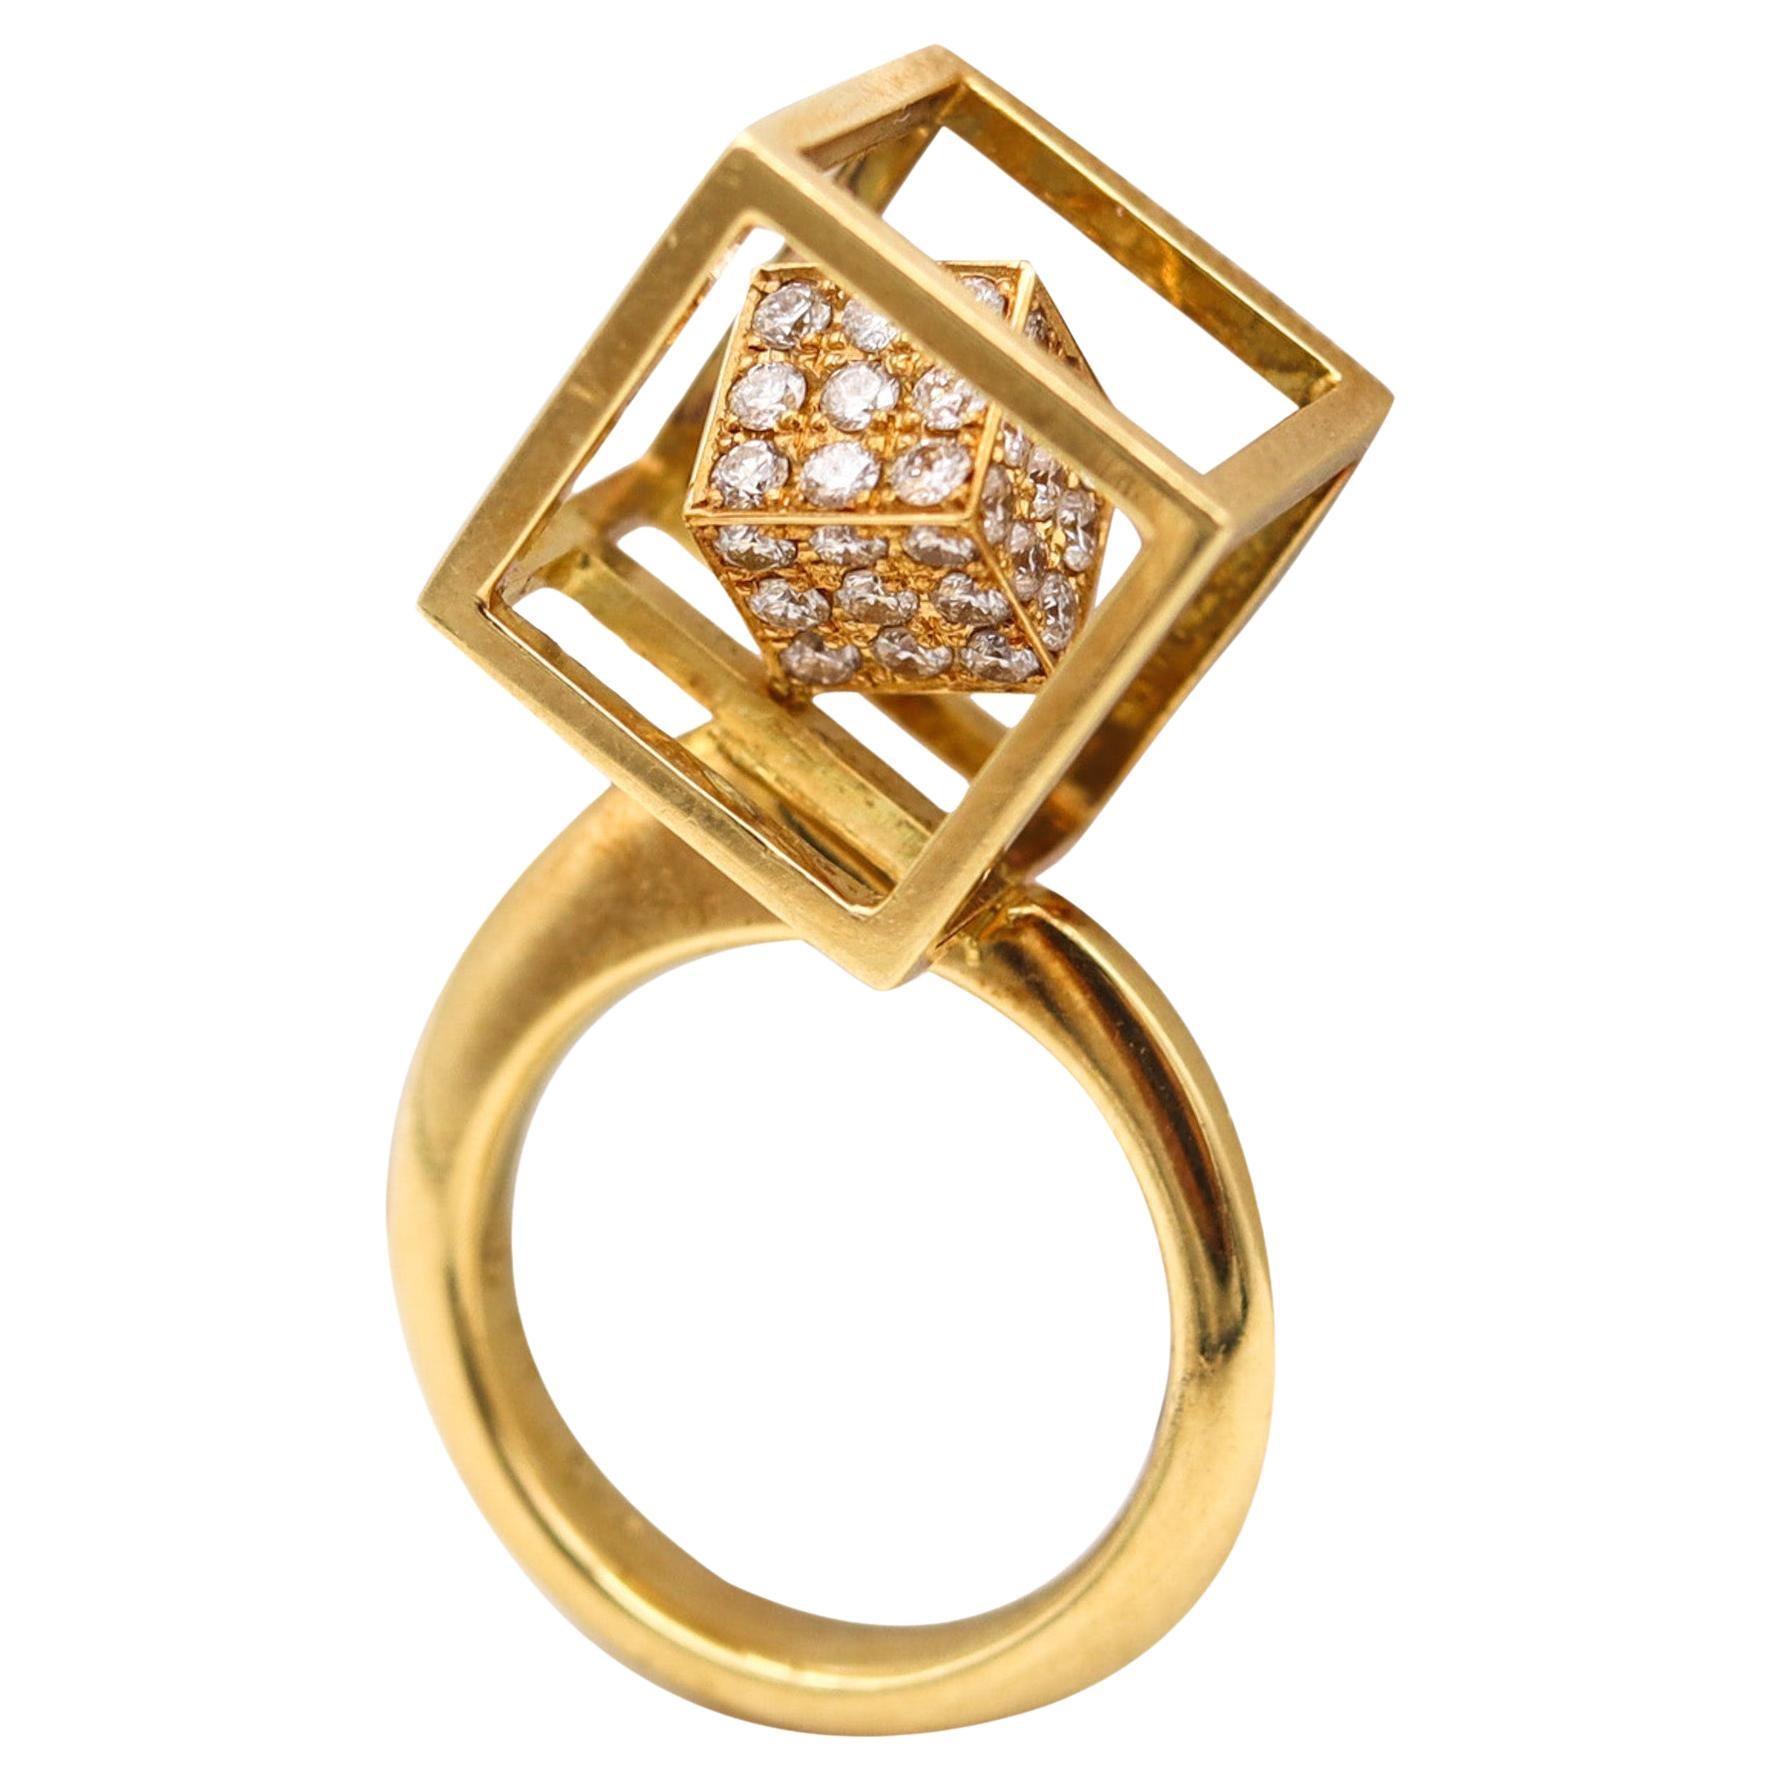 Modernist Sculptural Op Art Ring In 18Kt Yellow Gold With 1.20 Ctw In Diamonds For Sale